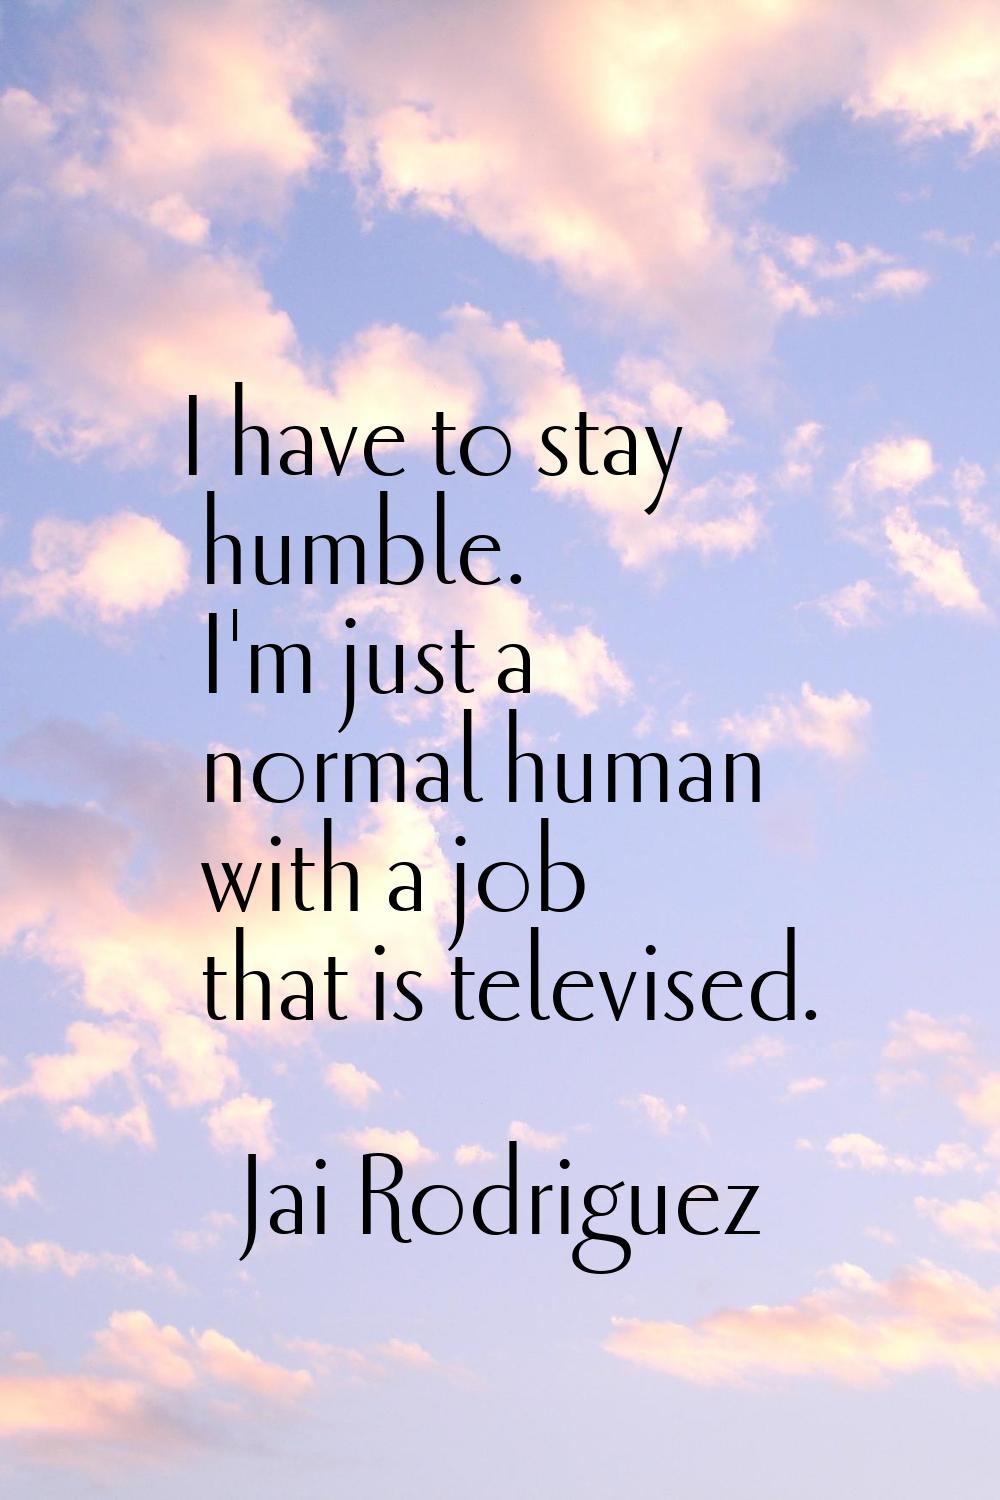 I have to stay humble. I'm just a normal human with a job that is televised.